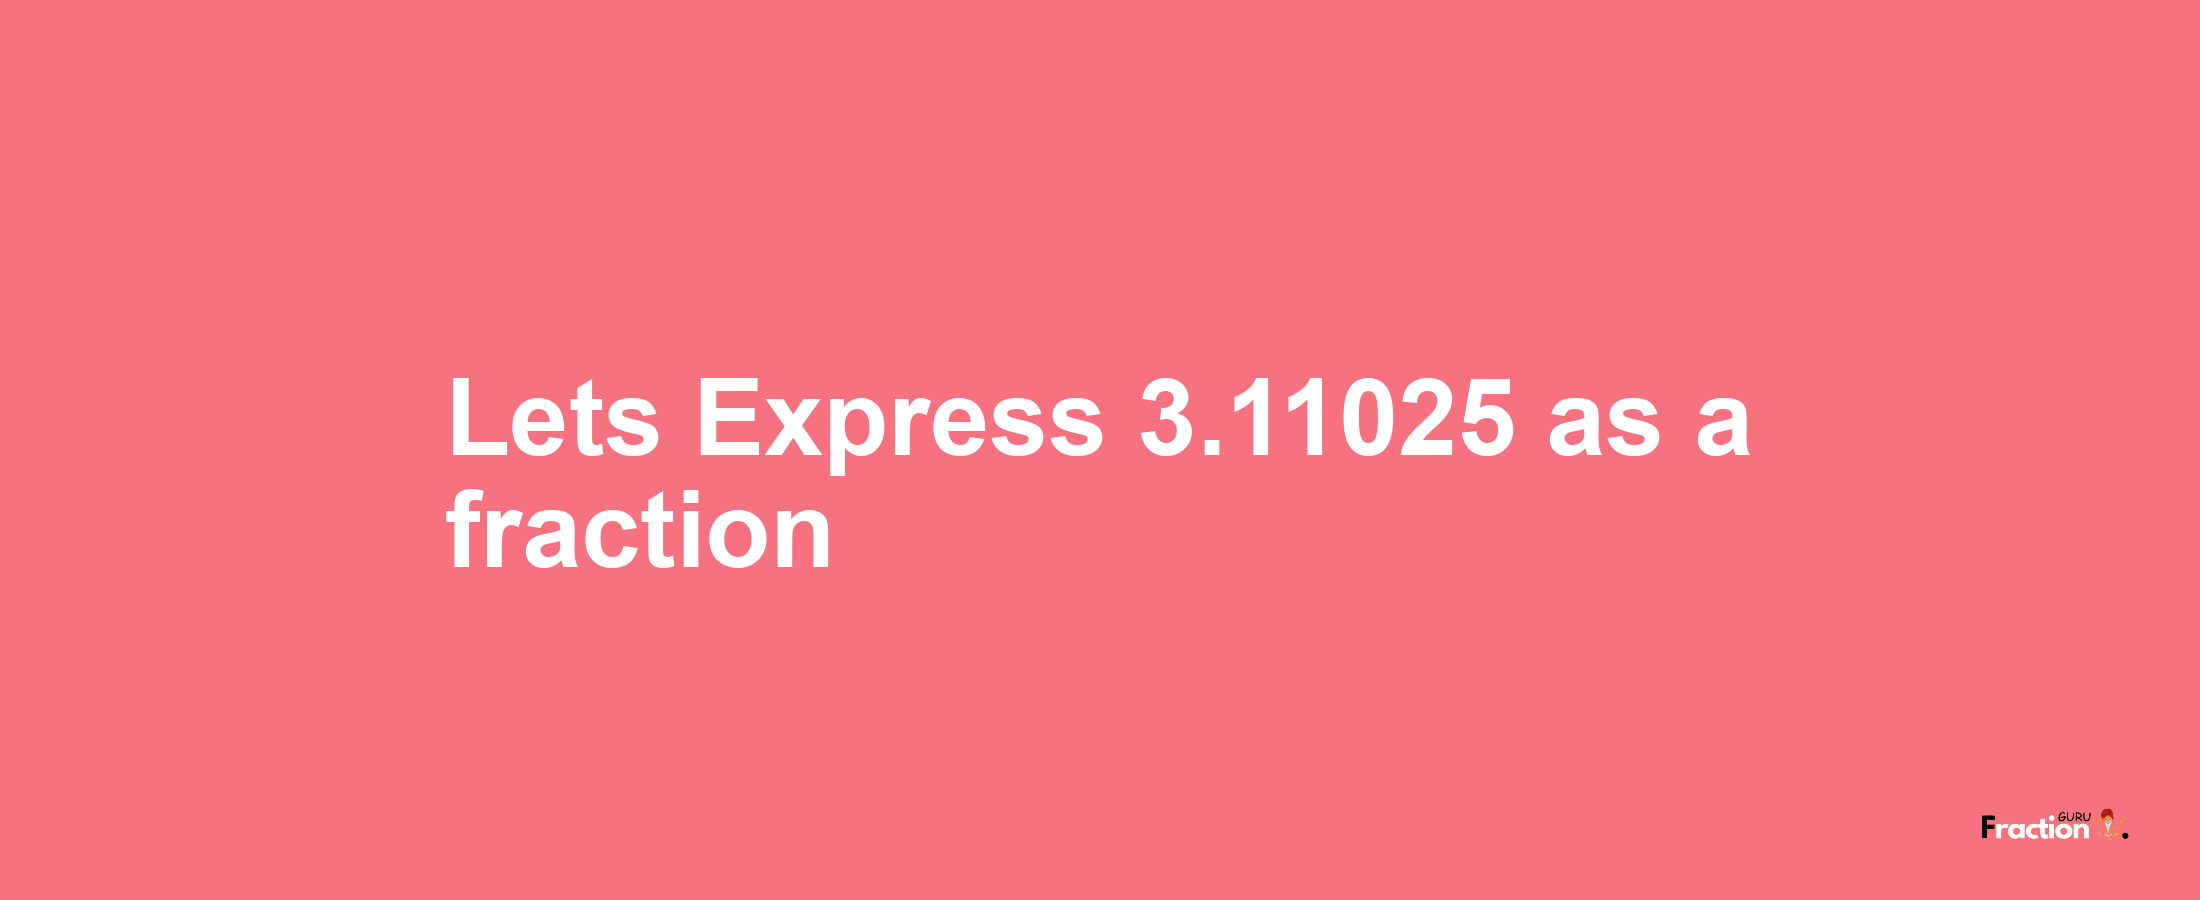 Lets Express 3.11025 as afraction